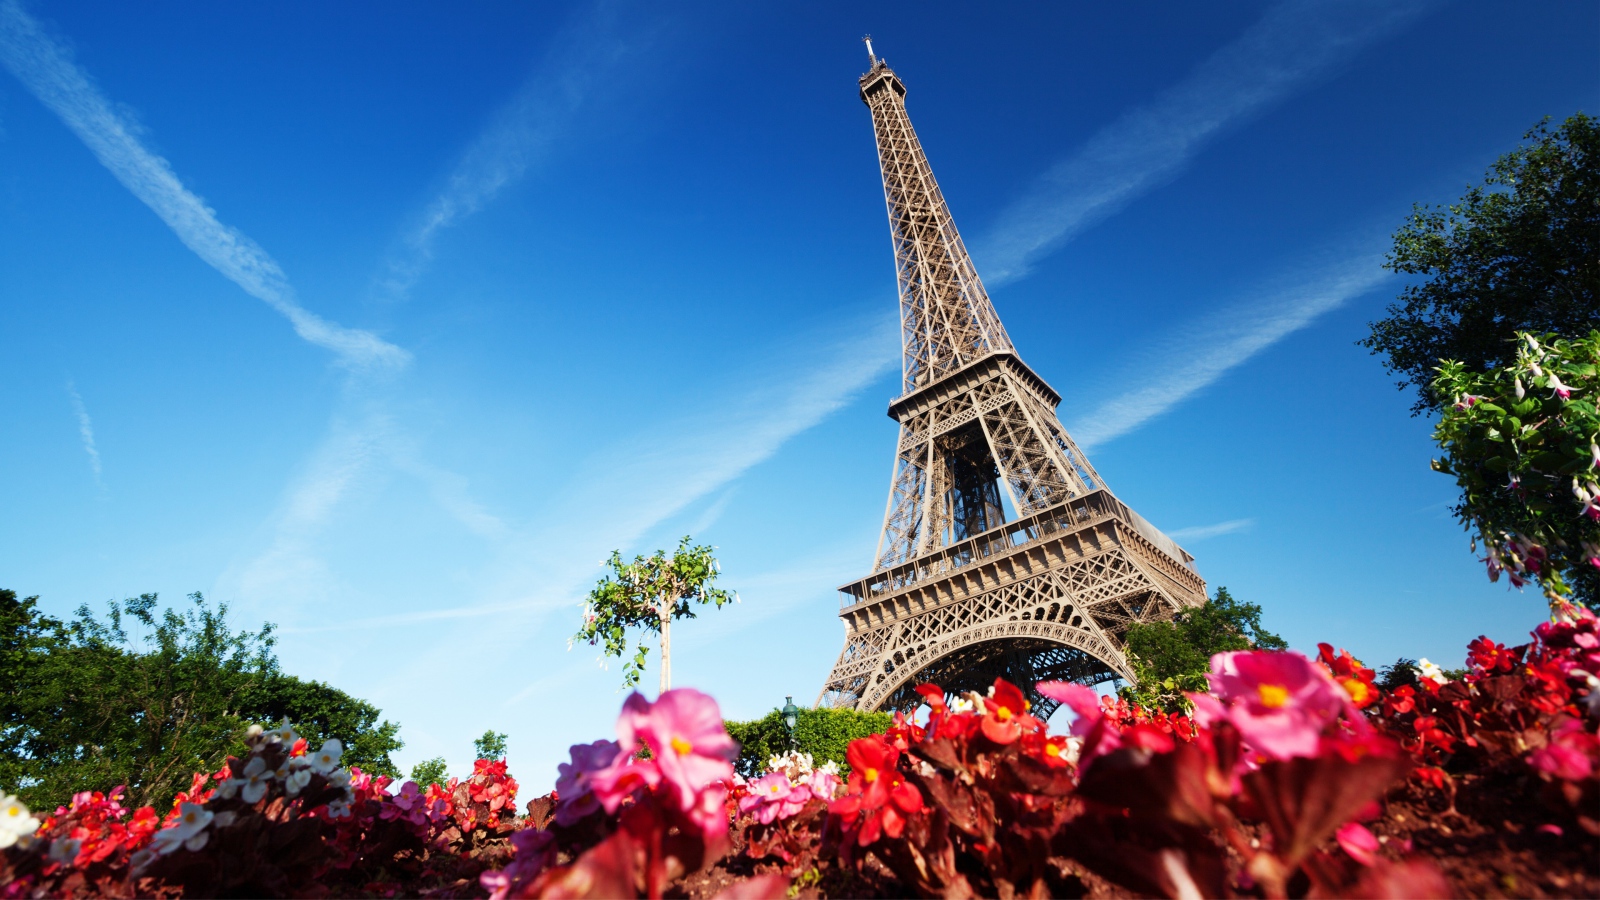 Eiffel tower on background of blue sky in Paris, France